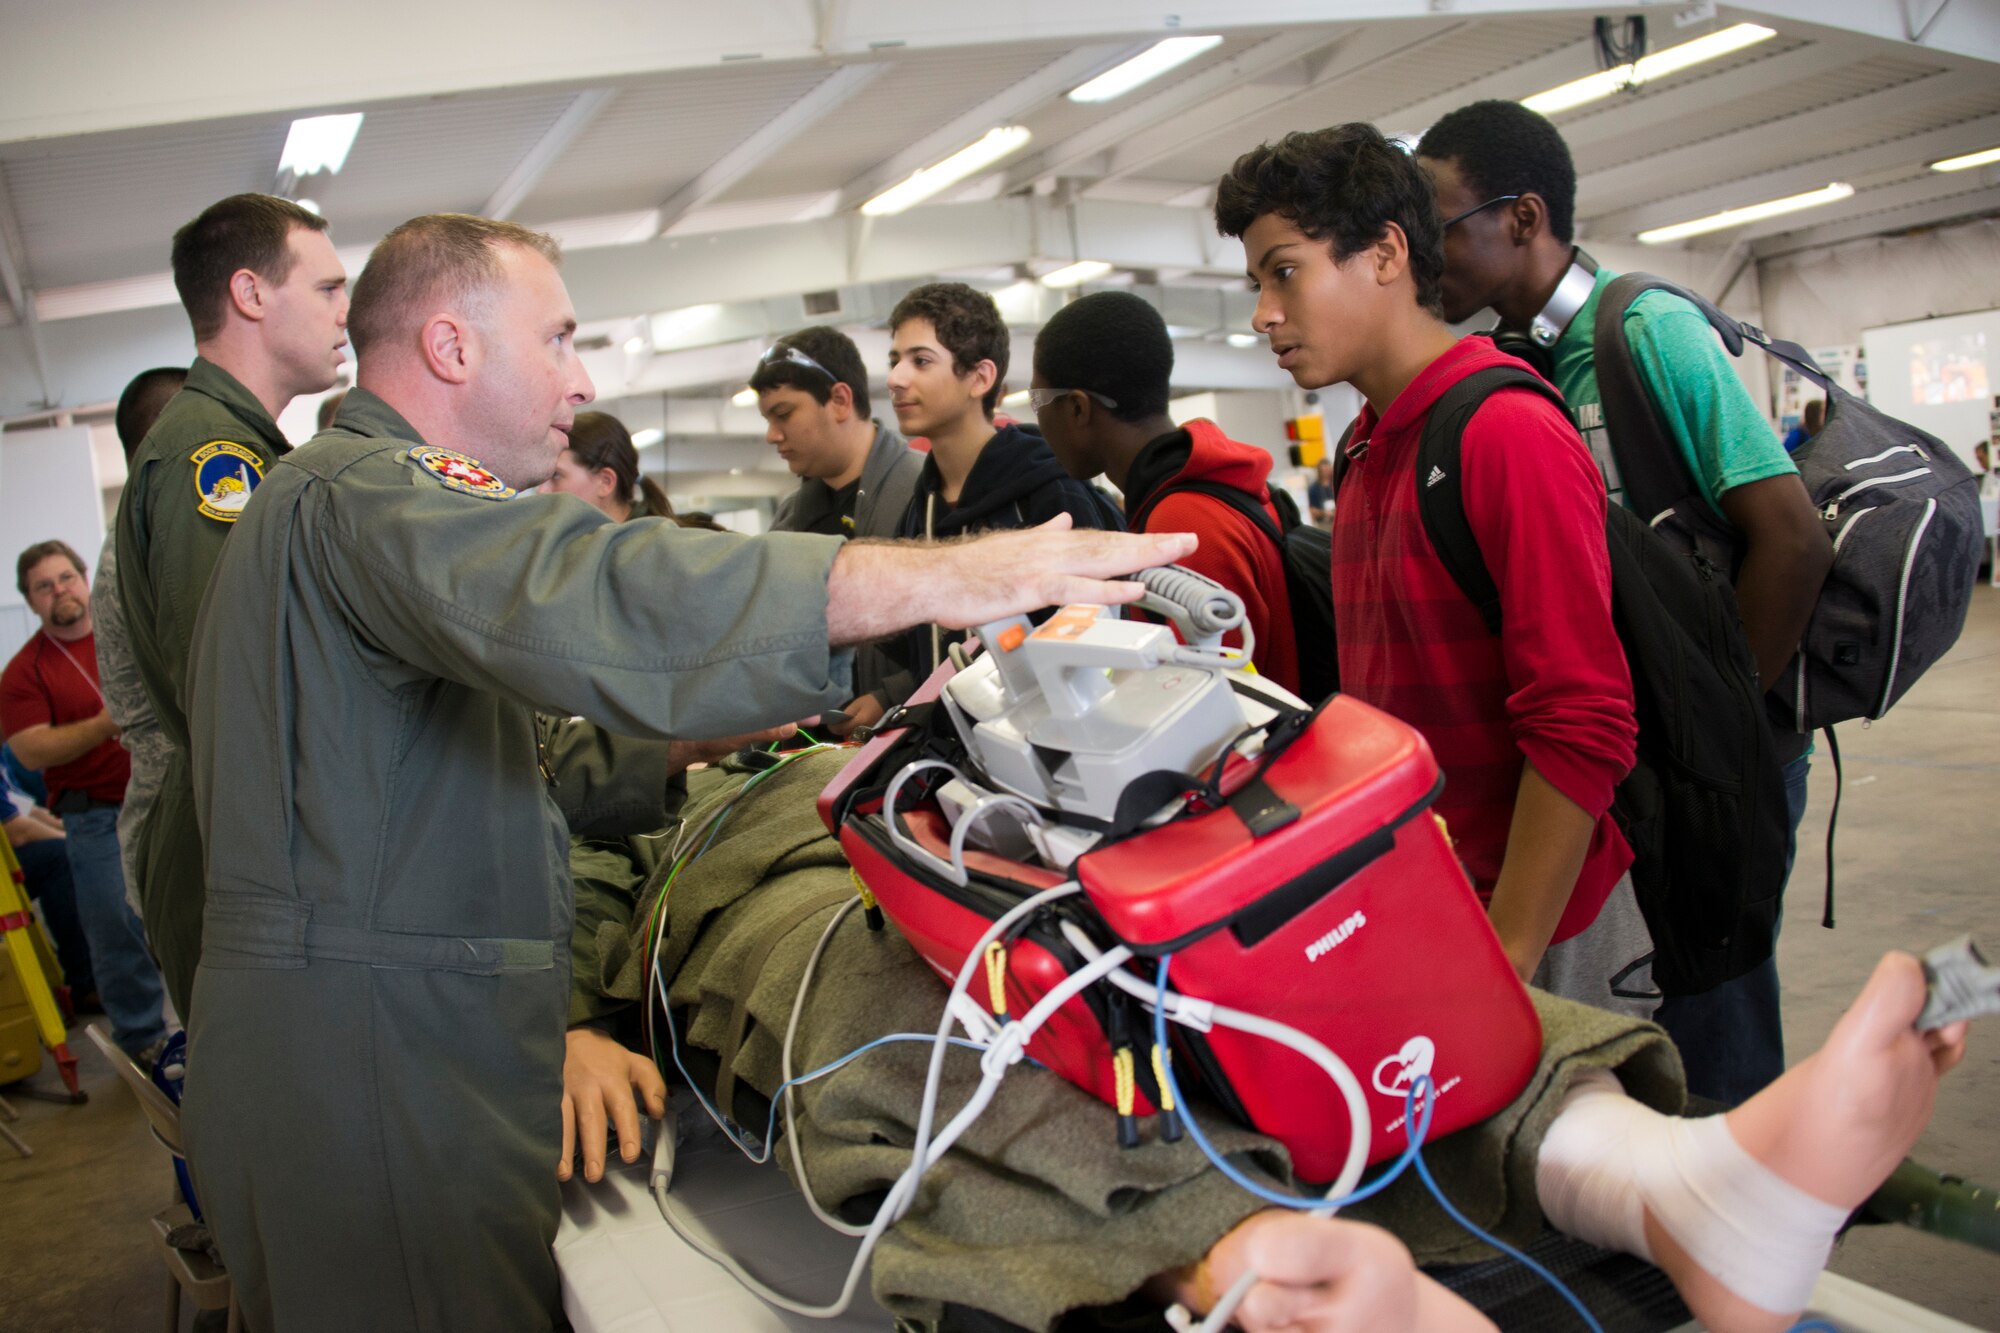 Tech Sgt. Carl Stewart II, 459th Aeromedical Evacuation Squadron aeromedical evacuation technician, informs students about a career as an air transport medic at the 11th annual Virginia Department of Transportation Career Fair at Prince William County Fairgrounds Oct. 8, 2015. The event, which drew more than 1,300 students from the Prince William County area, provided an opportunity for youths to learn about careers in the transportation industry. The 459th was on hand to discuss potential career paths as pilots, boom operators and inflight medics. (U.S. Air Force photo by Staff Sgt. Kat Justen)